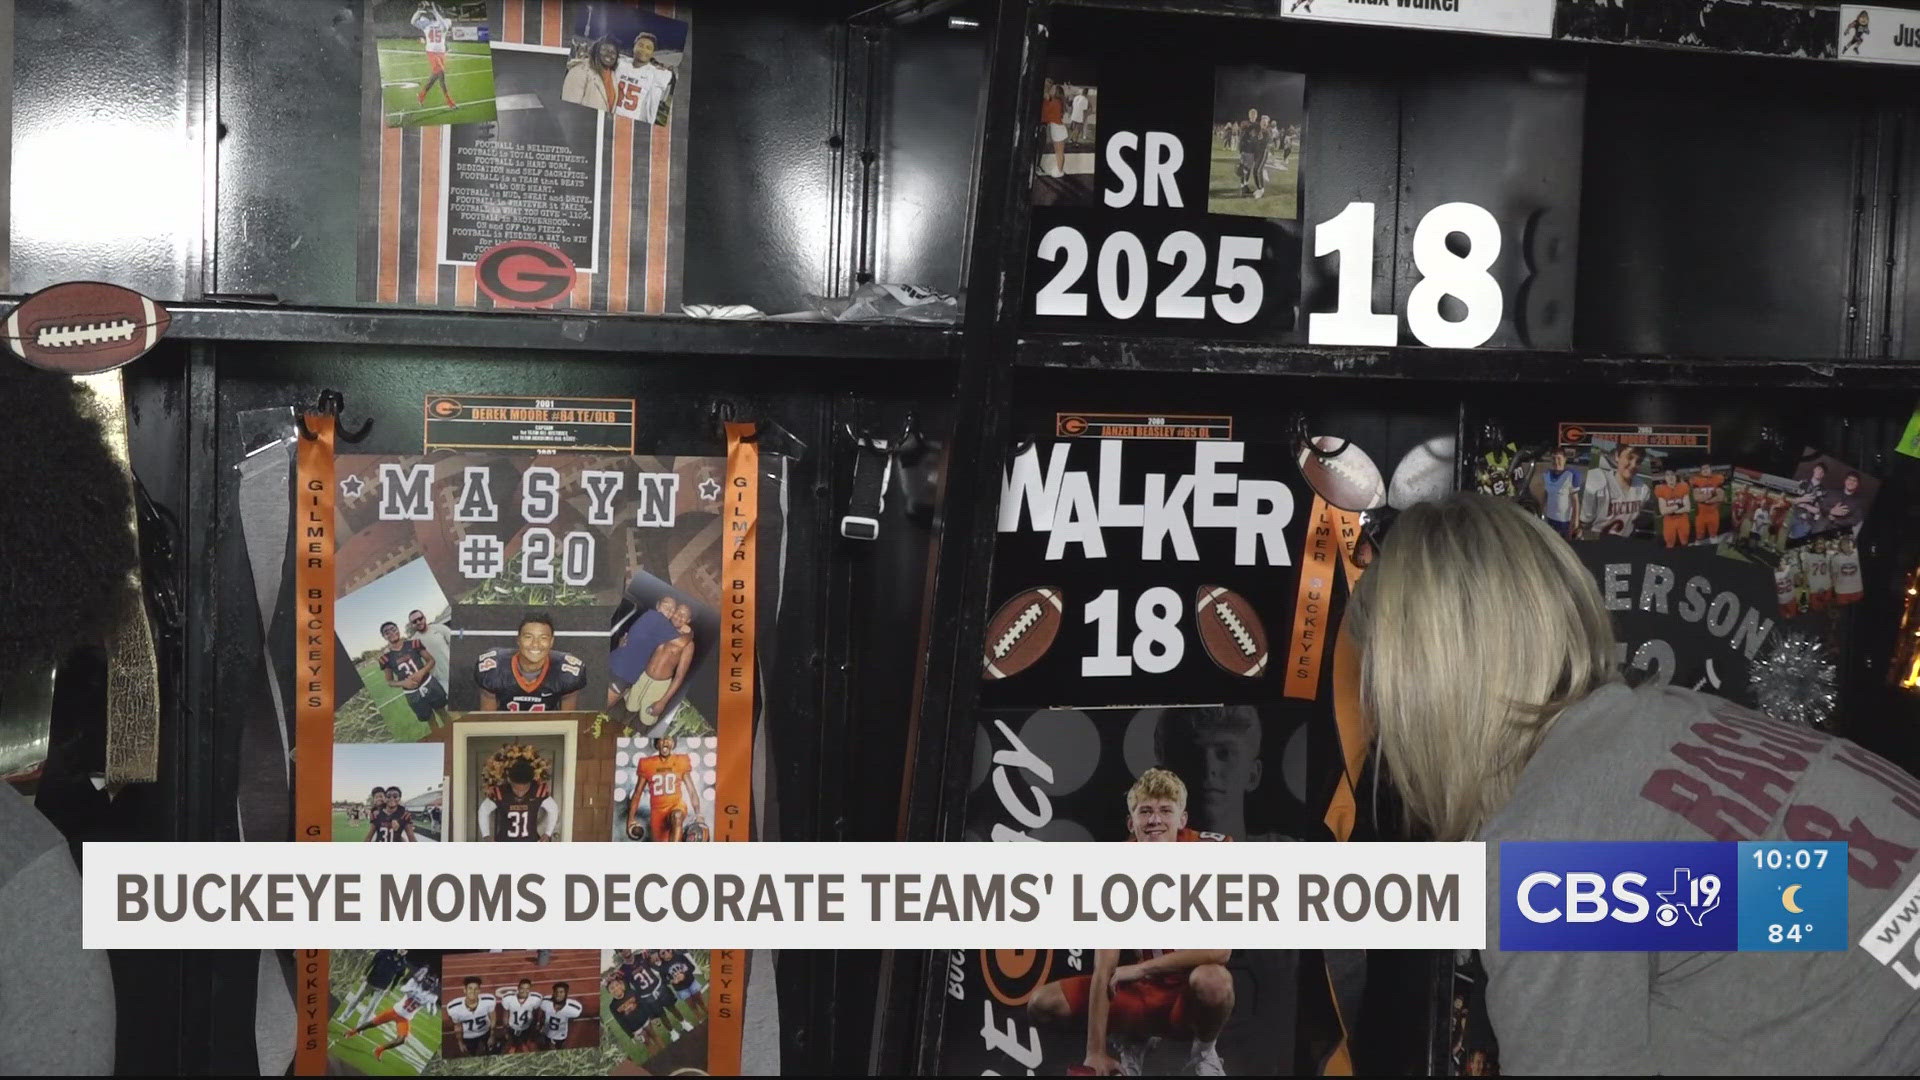 The Gilmer High School Football team welcomed players' moms to come by and decorate their kids lockers before the beginning of the season.